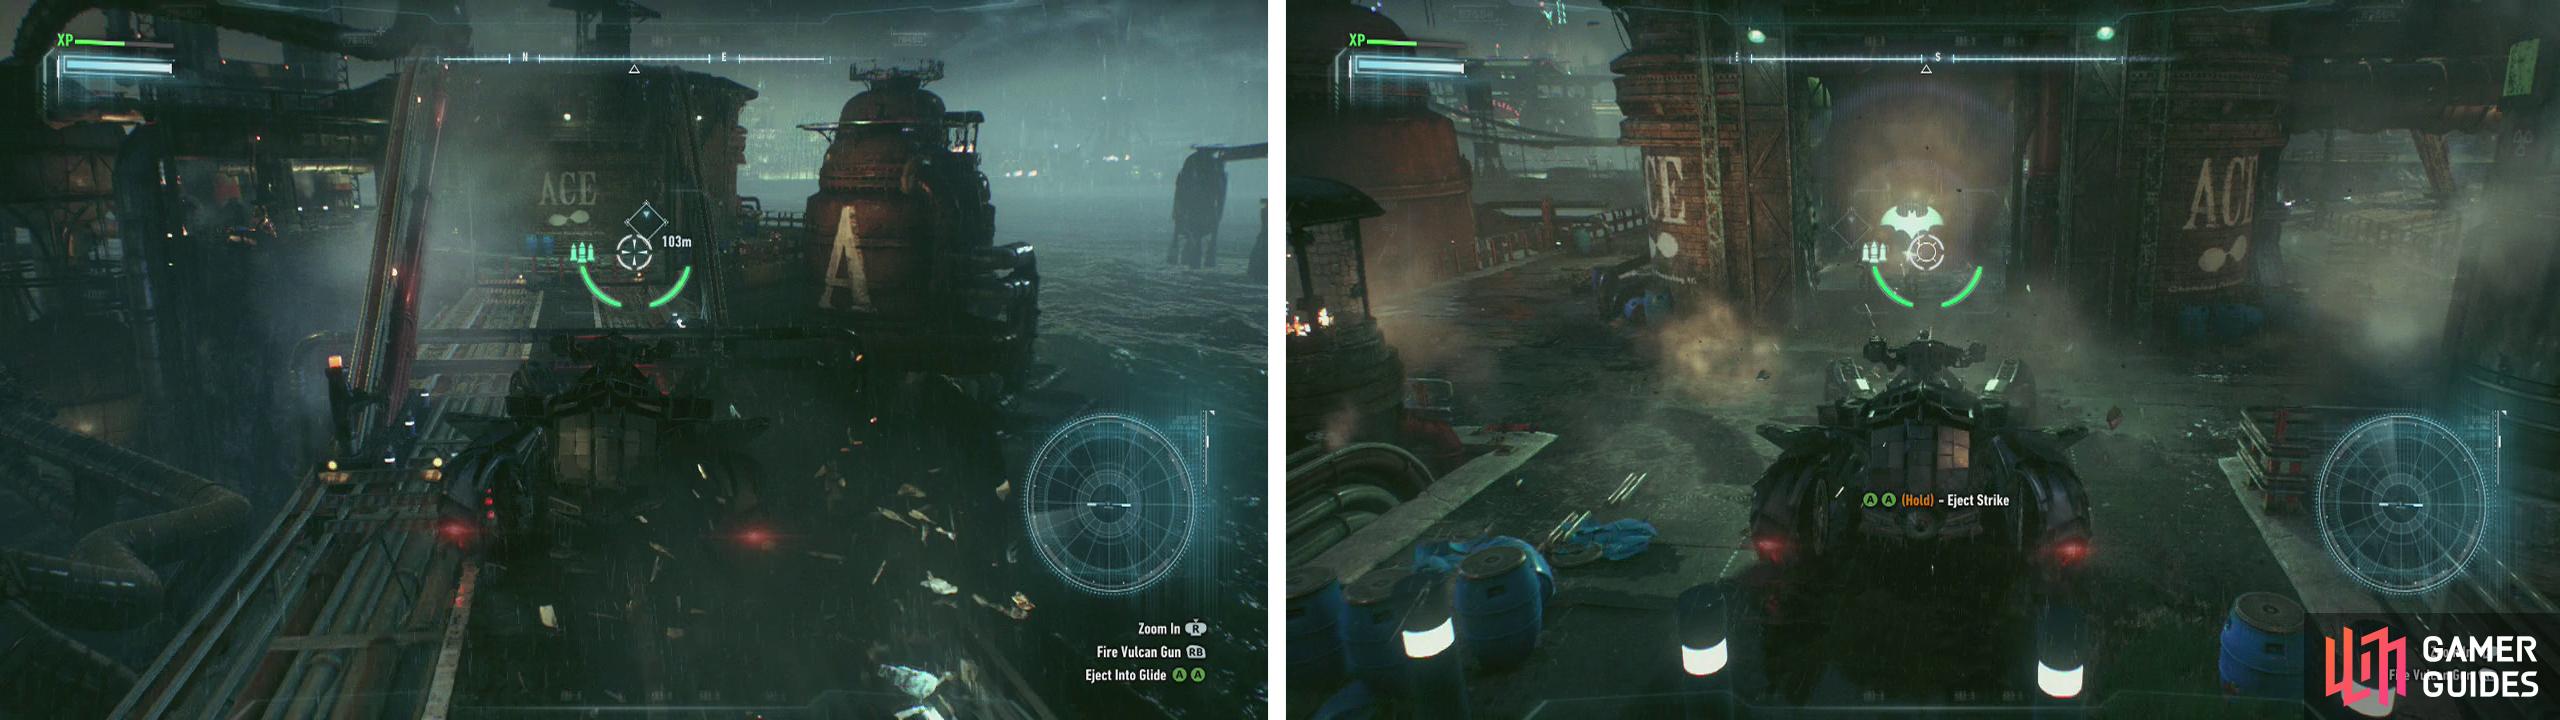 Use Battle Mode to traverse the narrow platform (left). Pull down the weak wall and shoot the enmies within (right).